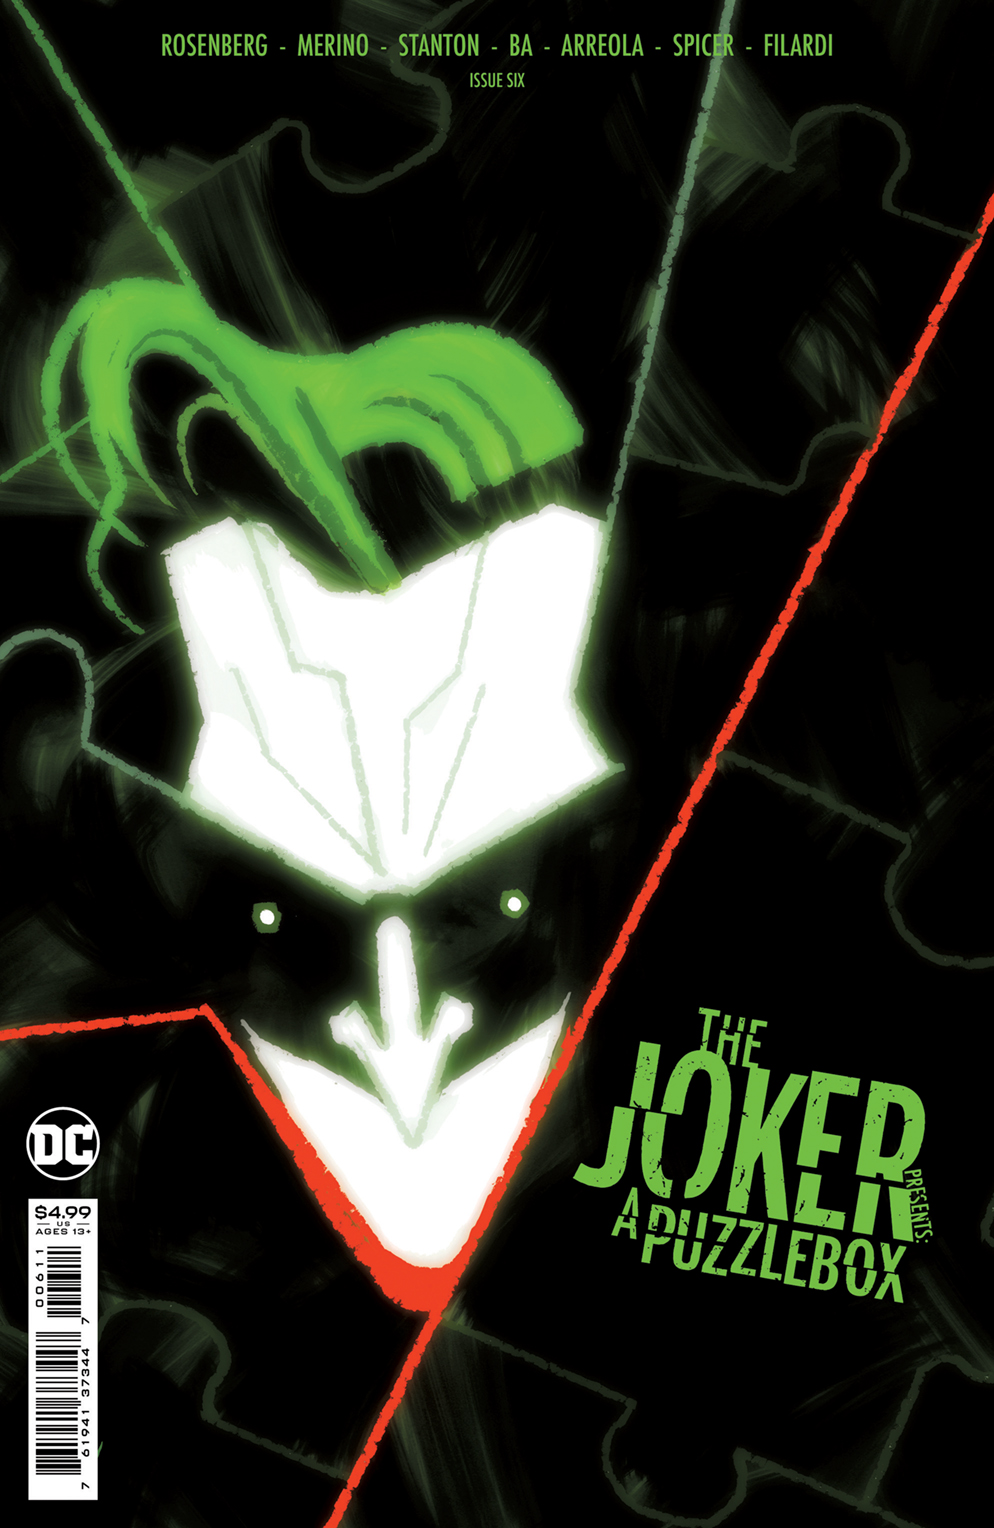 Joker Presents A Puzzlebox #6 Cover A Chip Zdarsky (Of 7)